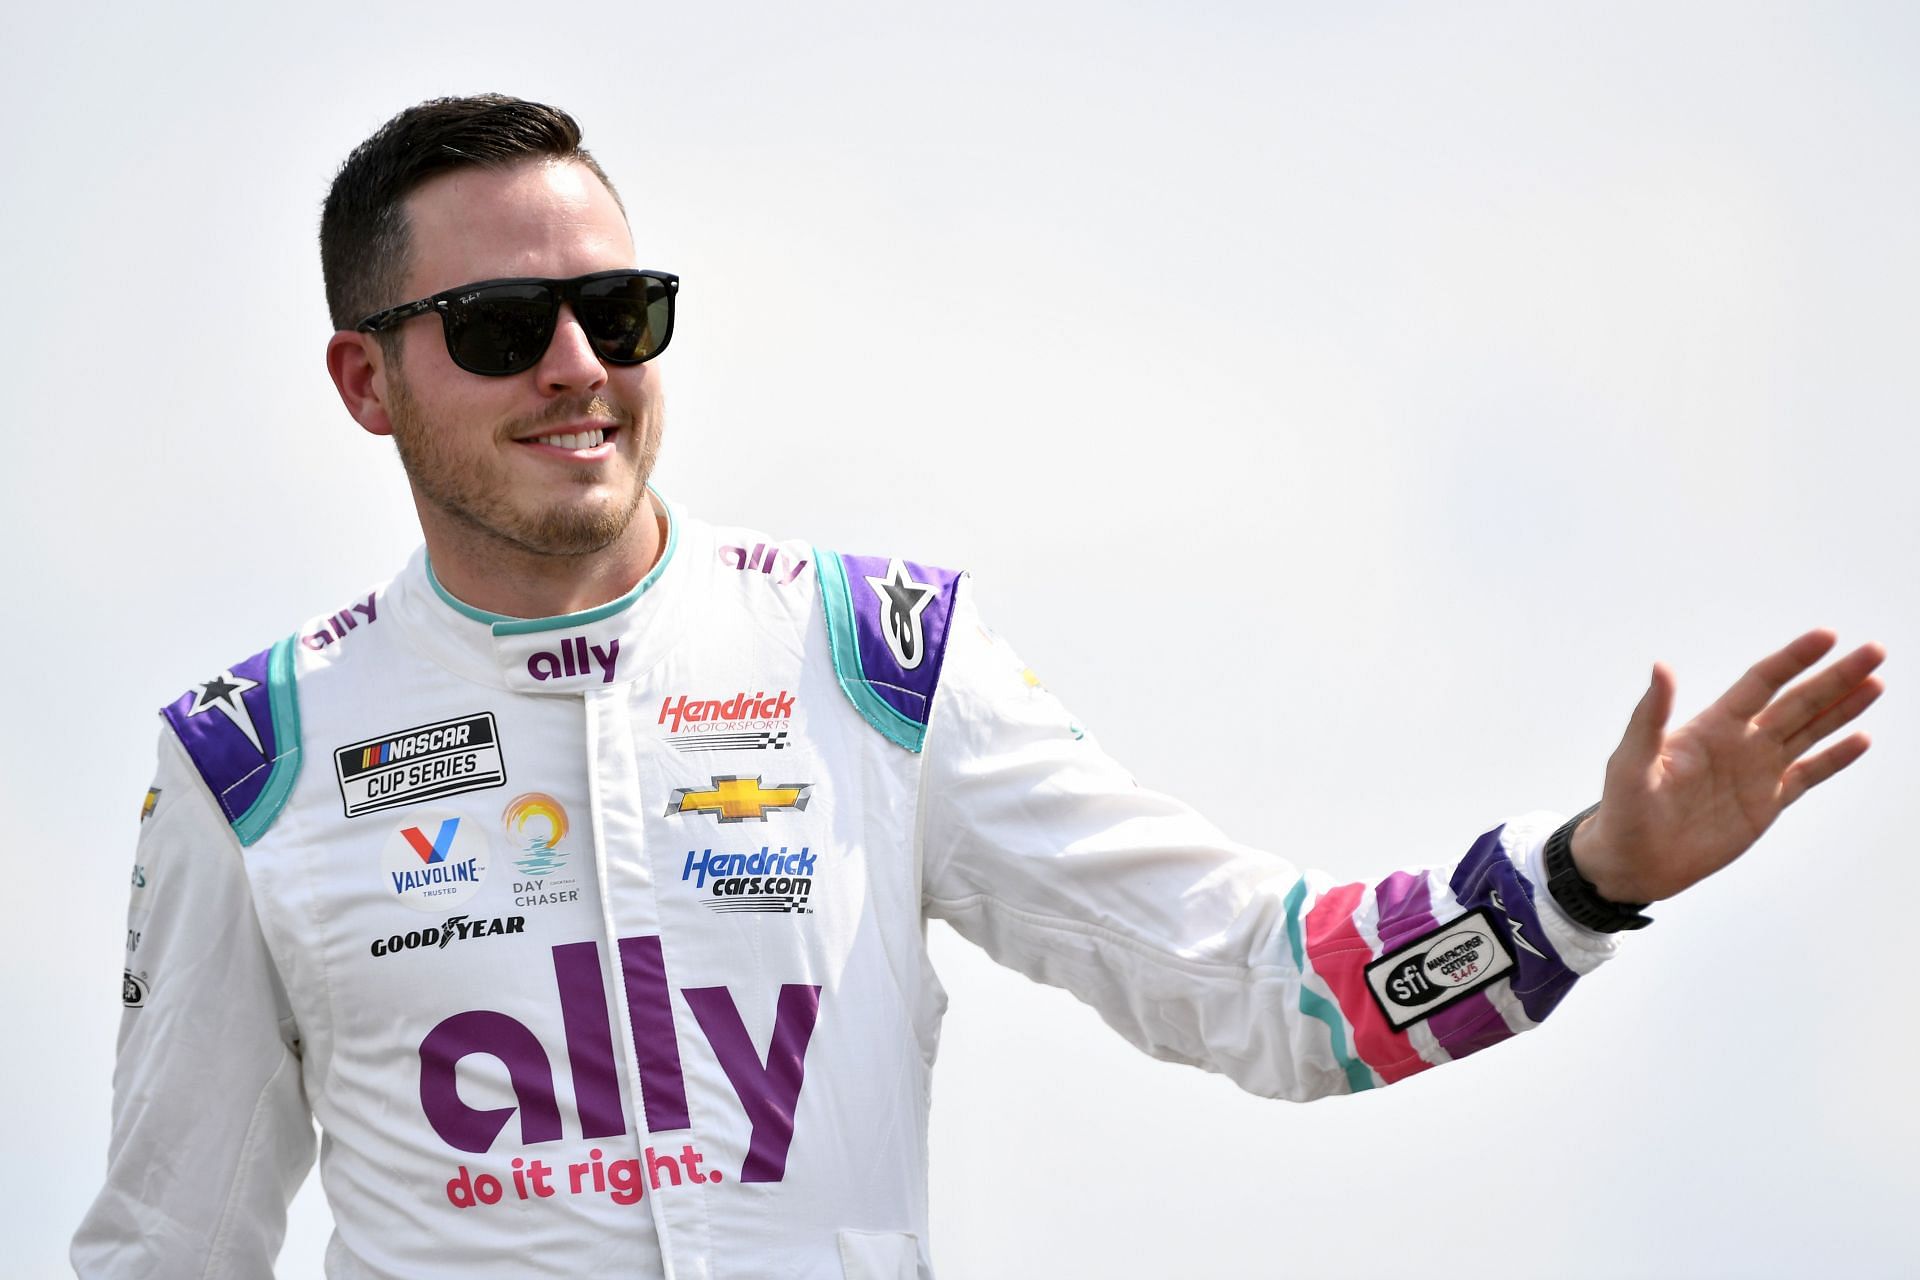 Alex Bowman waves to fans onstage during driver intros prior to the NASCAR Cup Series Ally 400 at Nashville Superspeedway (Photo by Logan Riely/Getty Images)